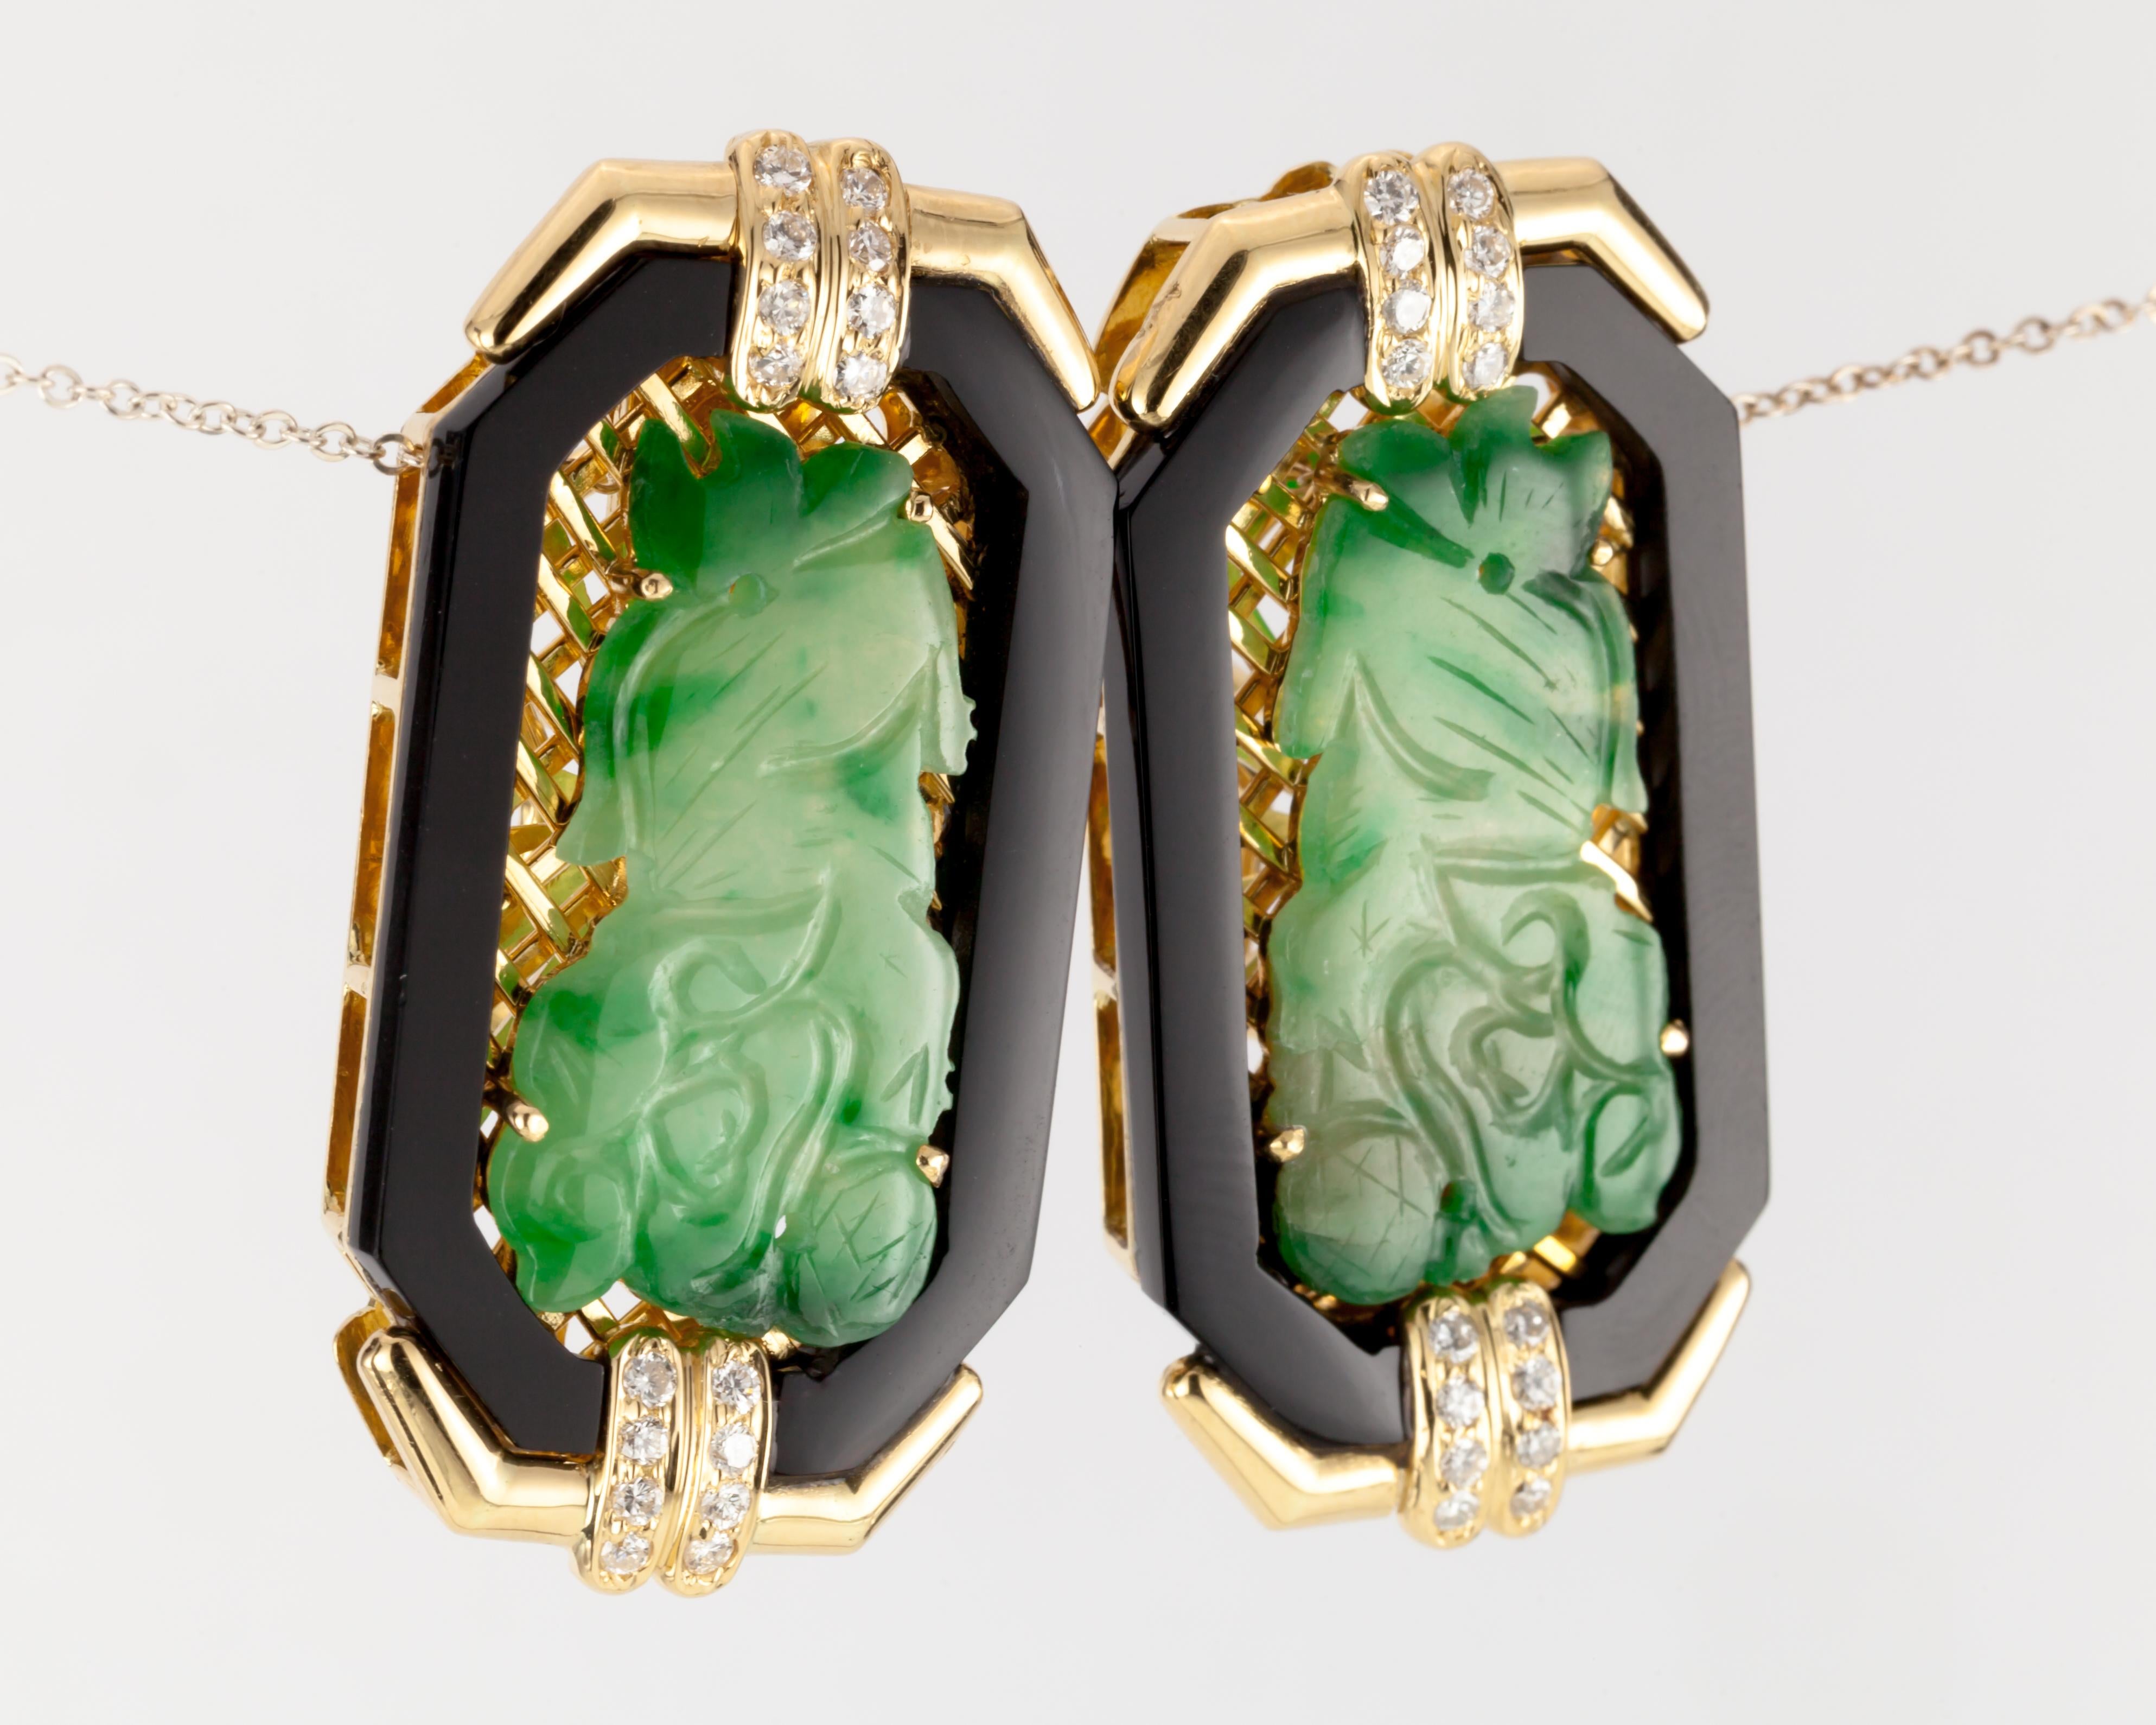 Imperial Jade with Onyx Border and Diamond Accents 18 Karat Yellow Gold Earrings For Sale 9